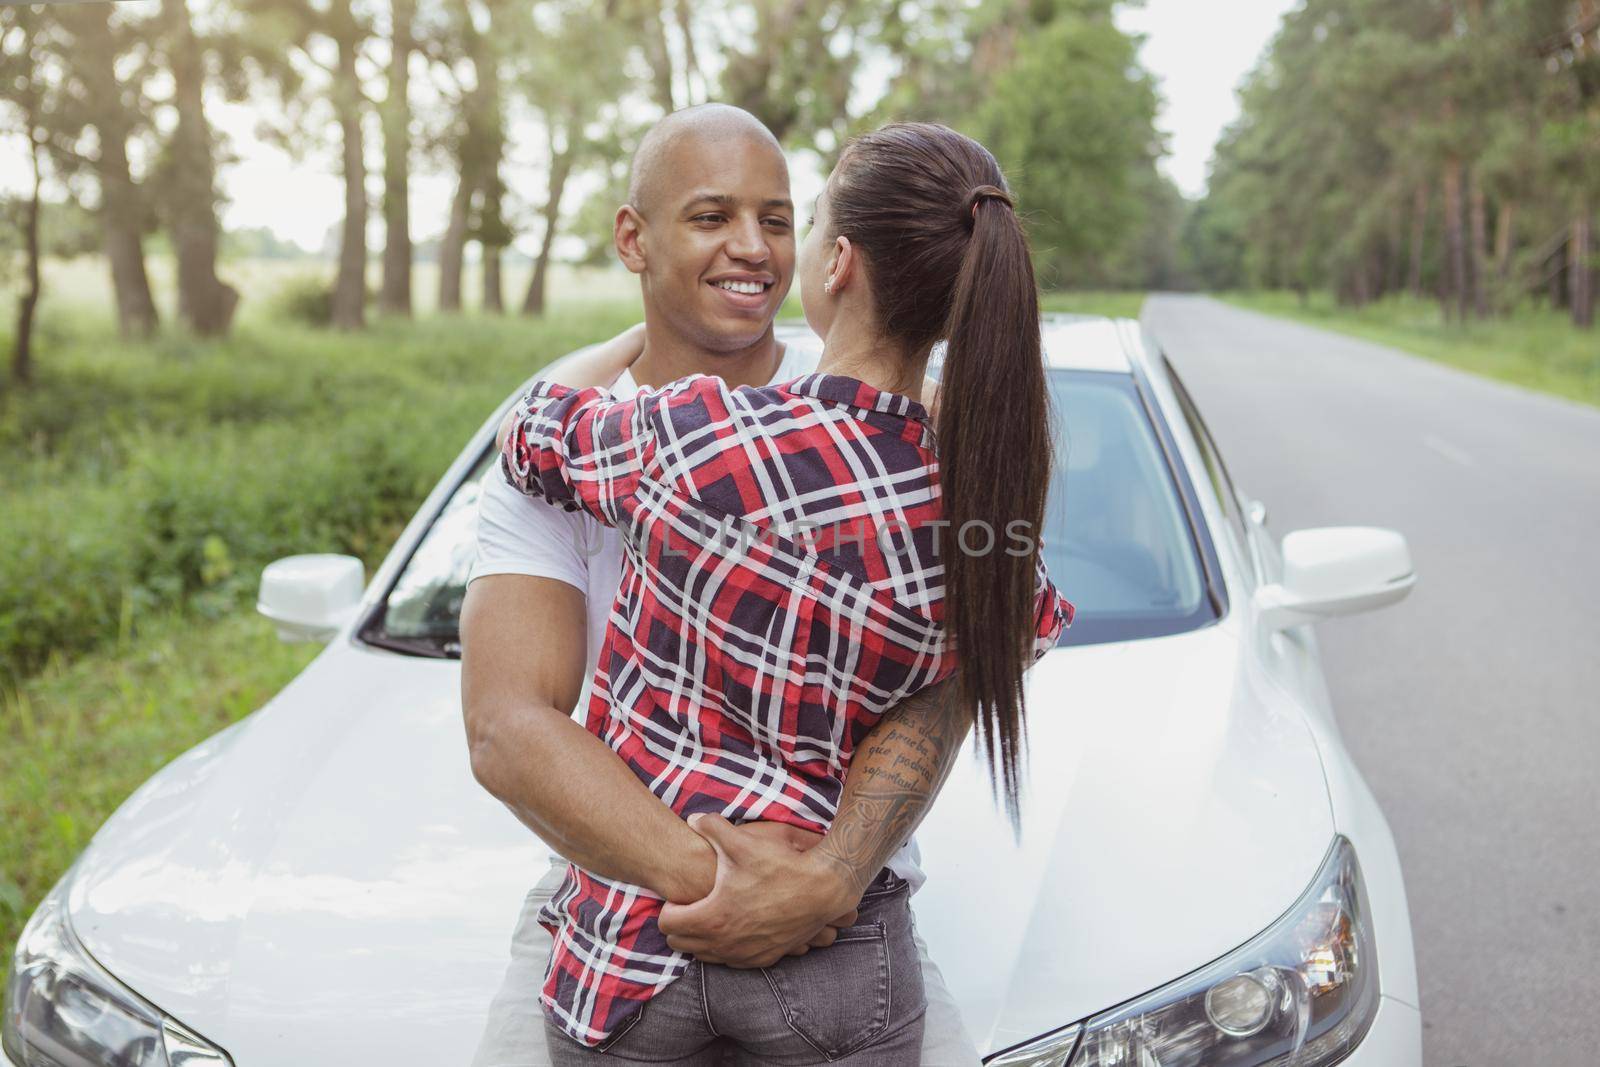 Handsome happy African man embracing his girlfriend near the car, while on a roadtrip together. Loving young couple enjoying travelling by car together